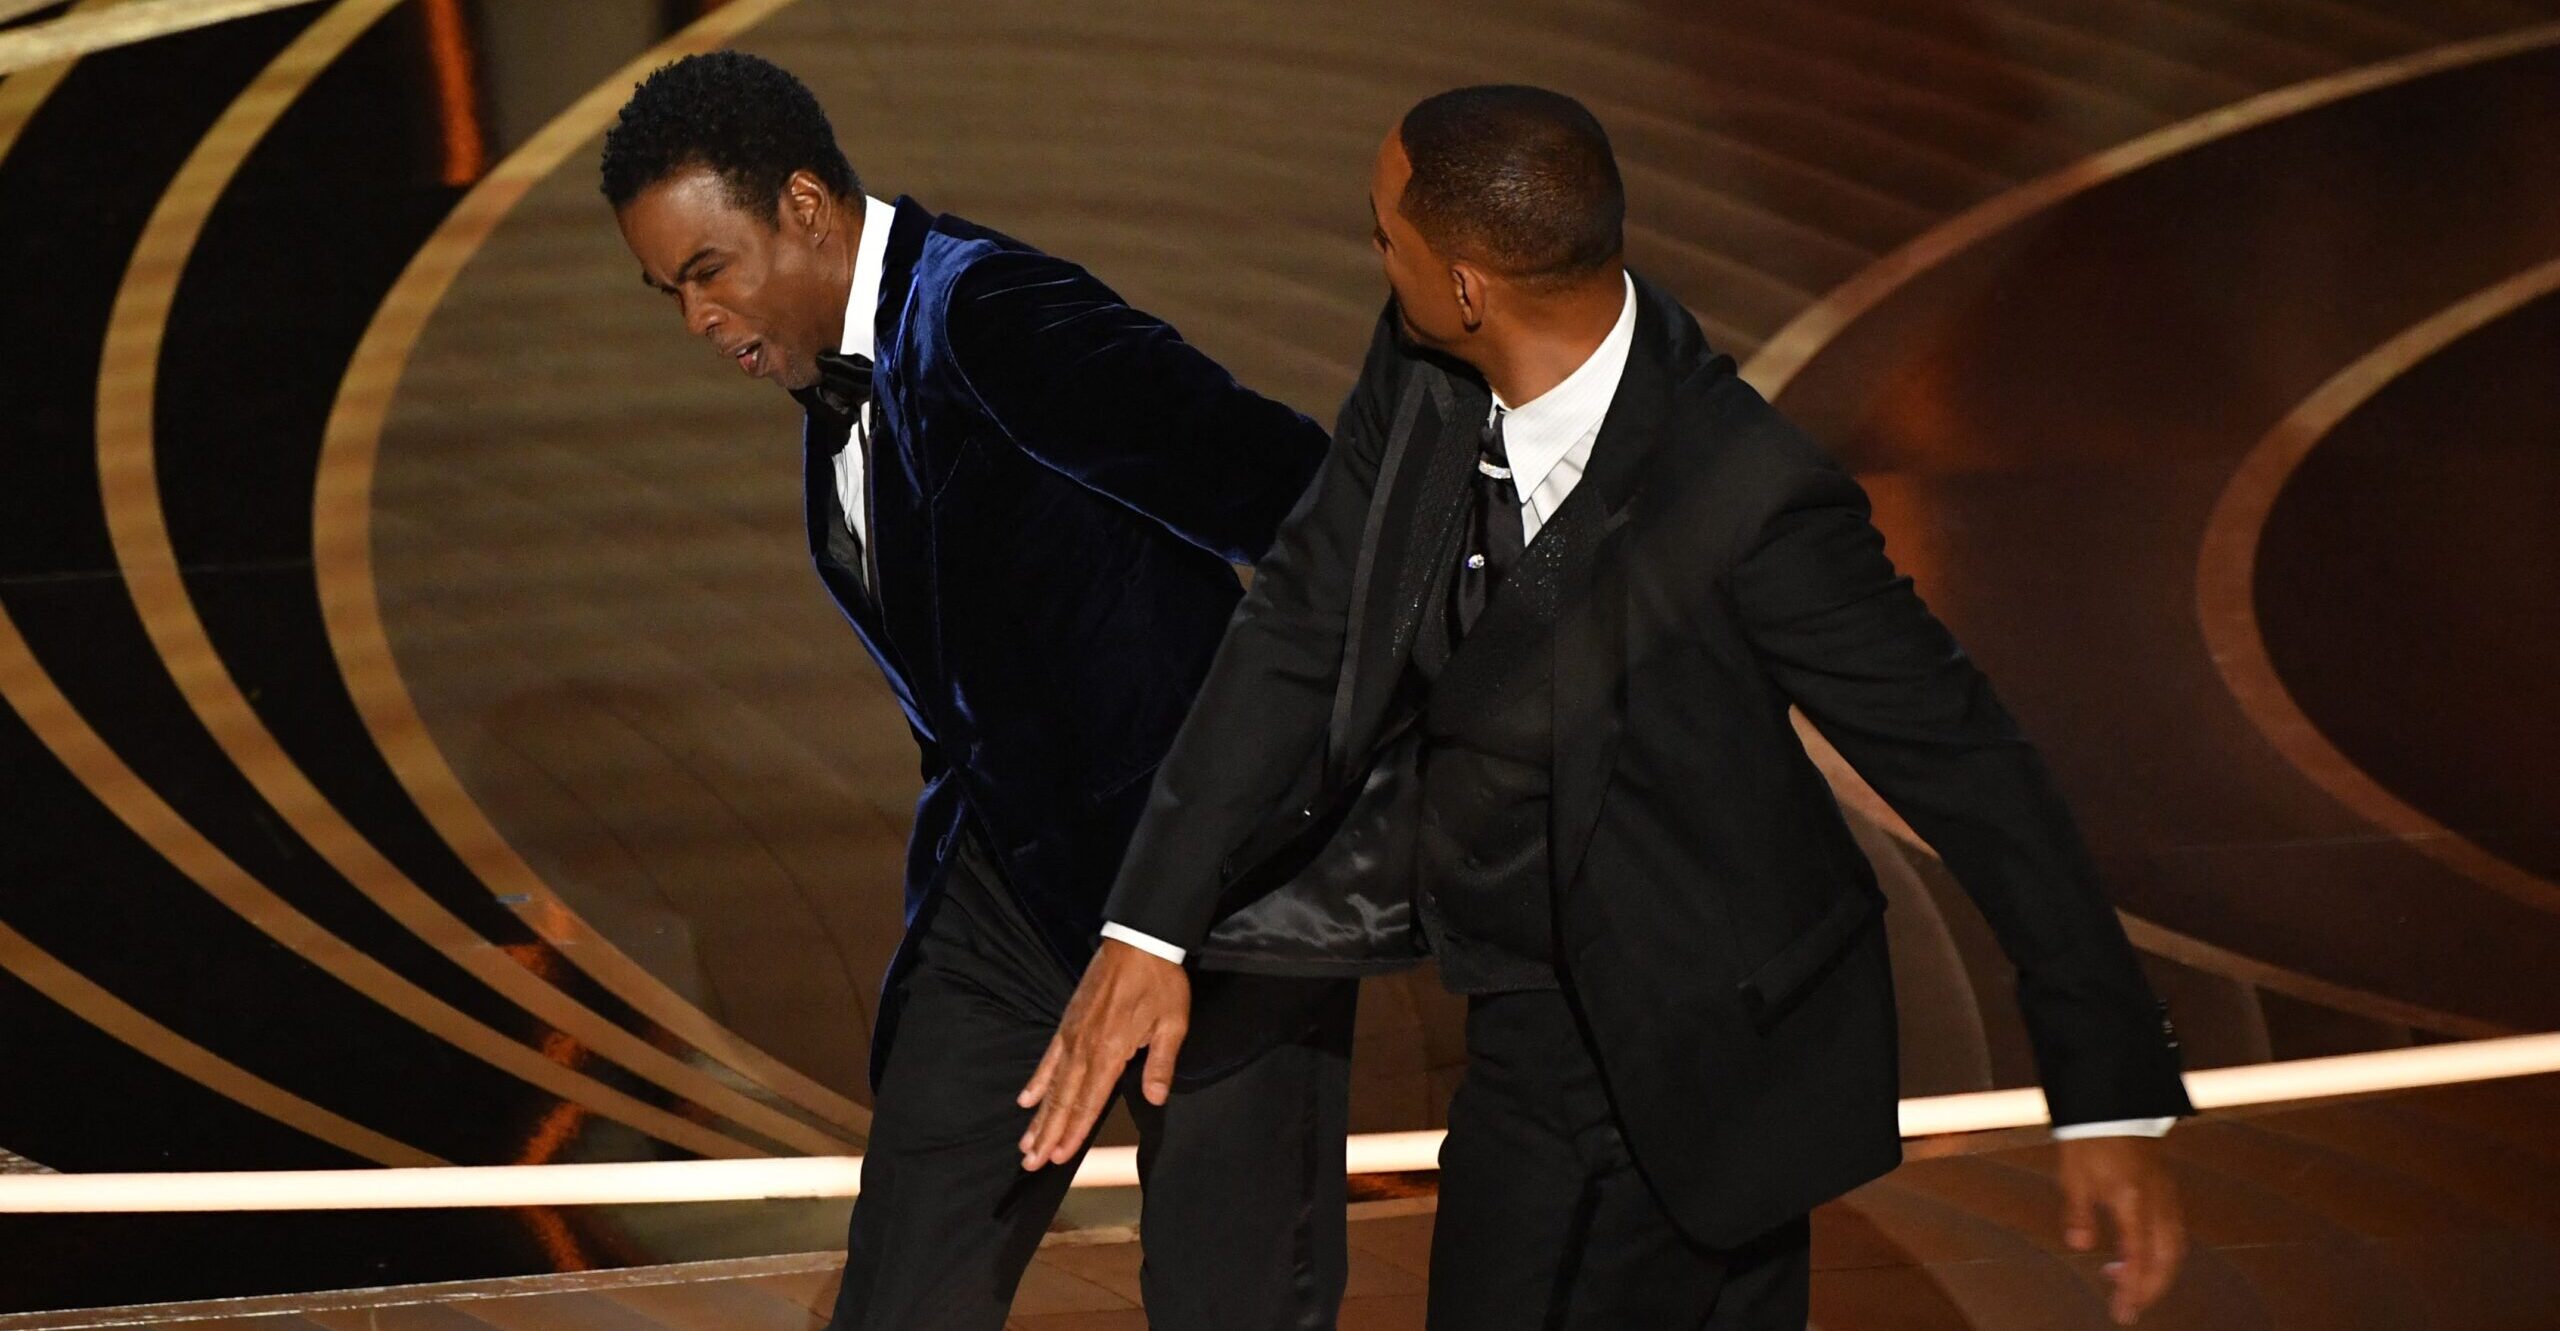 Will Smith Was Asked to Leave Oscars After Slapping Chris Rock, But Refused: Academy